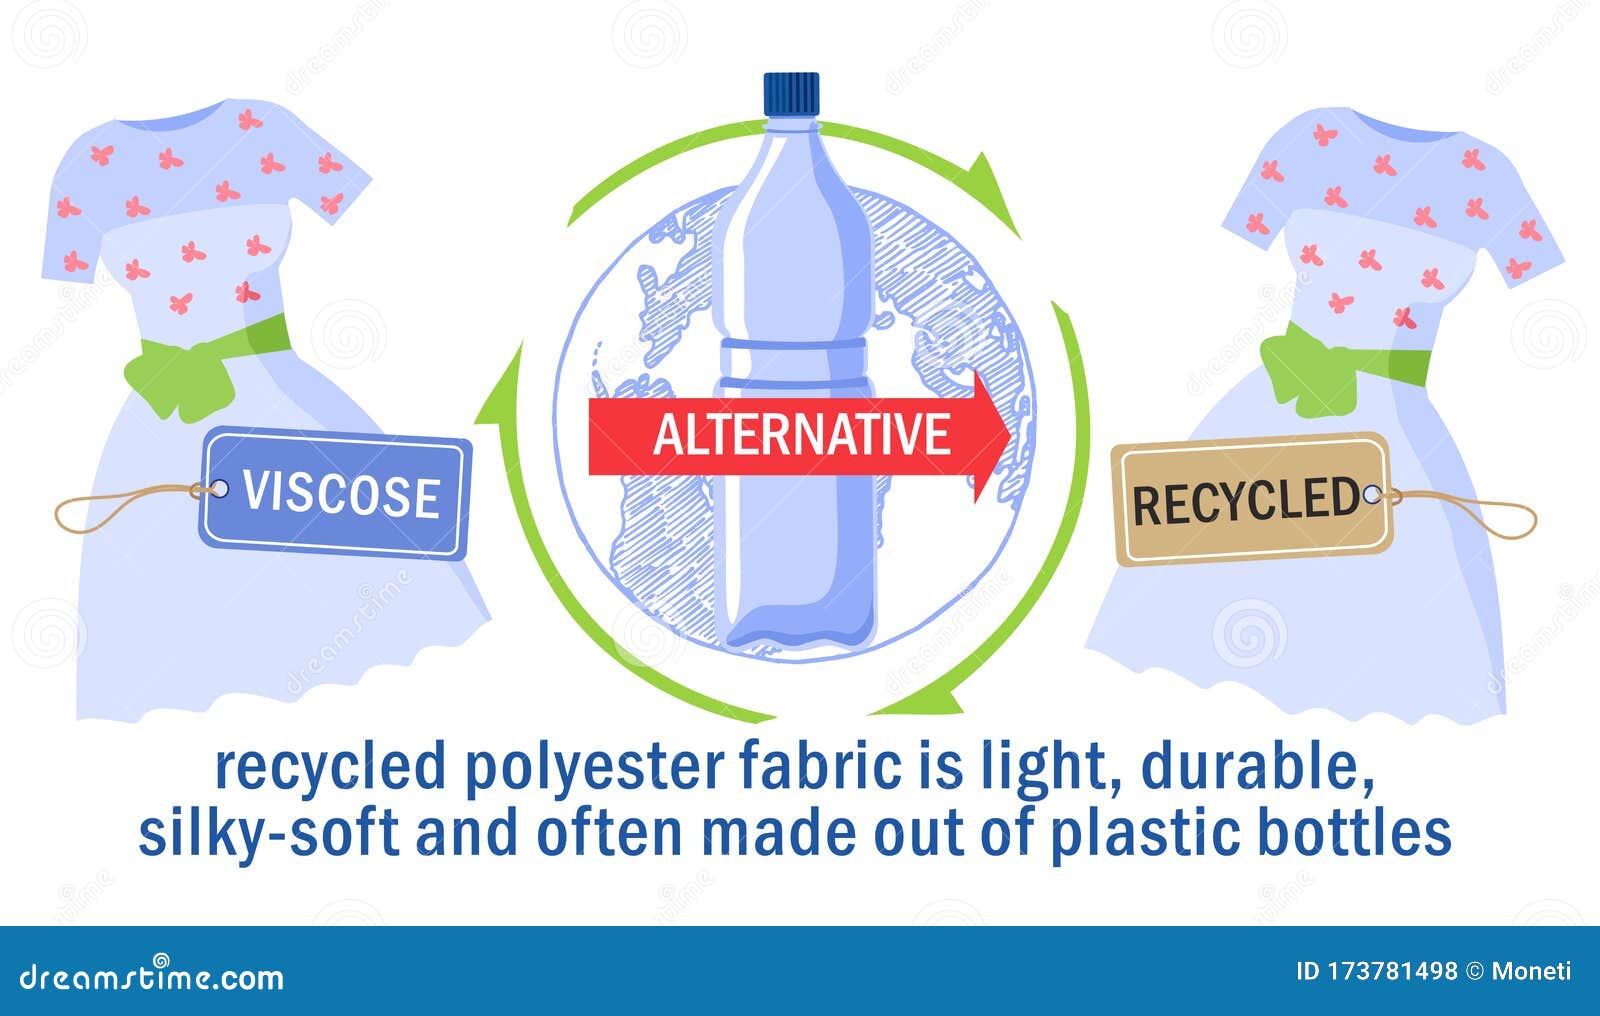 Recycled Polyester Fabric Made Out of Plastic Bottles. Environmental ...